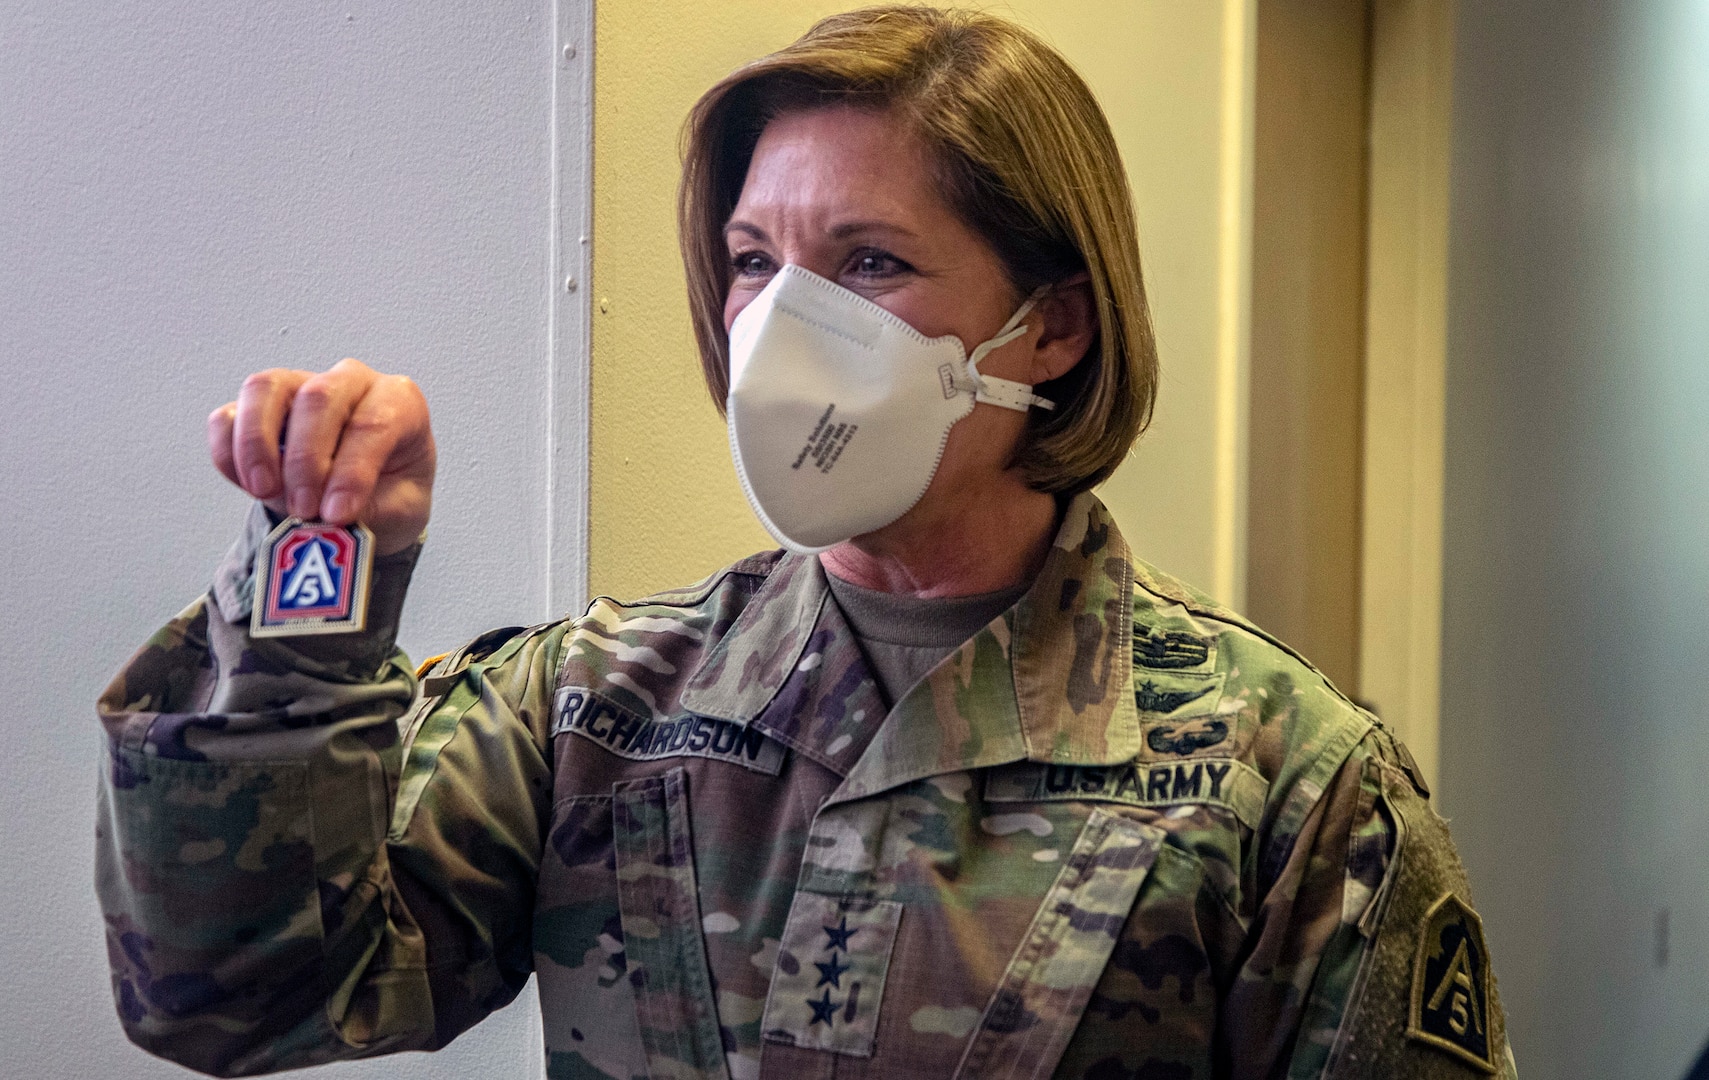 Lt. Gen. Laura Richardson, commanding general of U.S. Army North, presents coins to Soldiers during her visit to the Edison Field Medical Site in Edison, New Jersey, April 13, 2020.